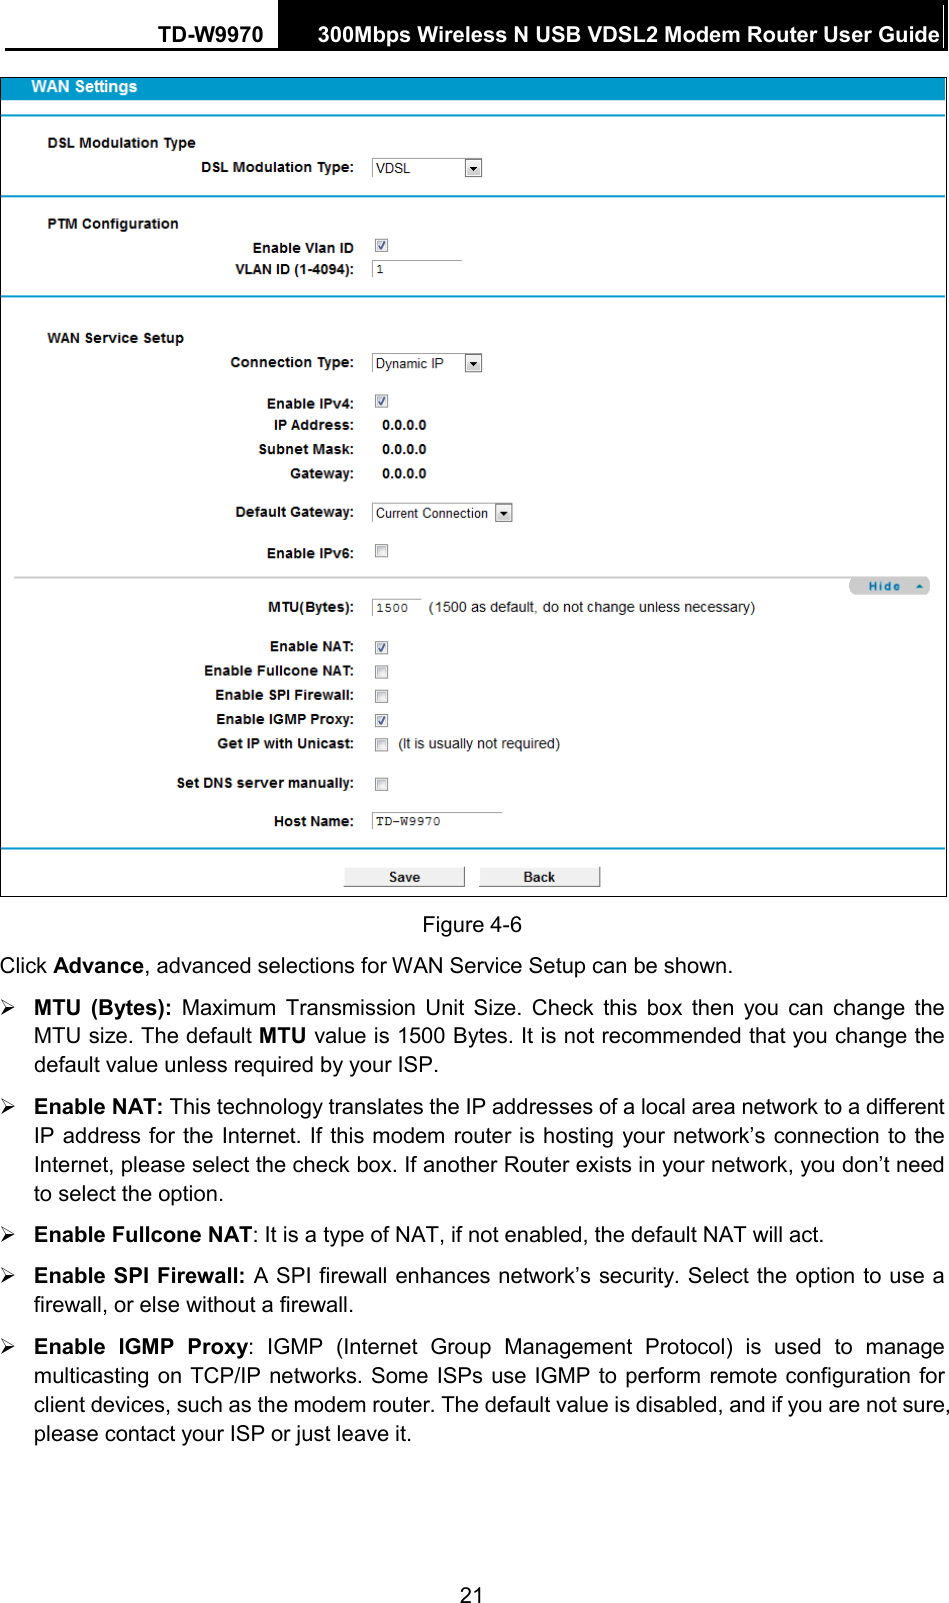 TD-W9970 300Mbps Wireless N USB VDSL2 Modem Router User Guide   Figure 4-6 Click Advance, advanced selections for WAN Service Setup can be shown.  MTU (Bytes):  Maximum Transmission Unit Size. Check this box then you can change the MTU size. The default MTU value is 1500 Bytes. It is not recommended that you change the default value unless required by your ISP.  Enable NAT: This technology translates the IP addresses of a local area network to a different IP address for the Internet. If this modem router is hosting your network’s connection to the Internet, please select the check box. If another Router exists in your network, you don’t need to select the option.  Enable Fullcone NAT: It is a type of NAT, if not enabled, the default NAT will act.  Enable SPI Firewall: A SPI firewall enhances network’s security. Select the option to use a firewall, or else without a firewall.  Enable IGMP Proxy:  IGMP (Internet Group Management Protocol) is used to manage multicasting on TCP/IP networks. Some ISPs use IGMP to perform remote configuration for client devices, such as the modem router. The default value is disabled, and if you are not sure, please contact your ISP or just leave it. 21 